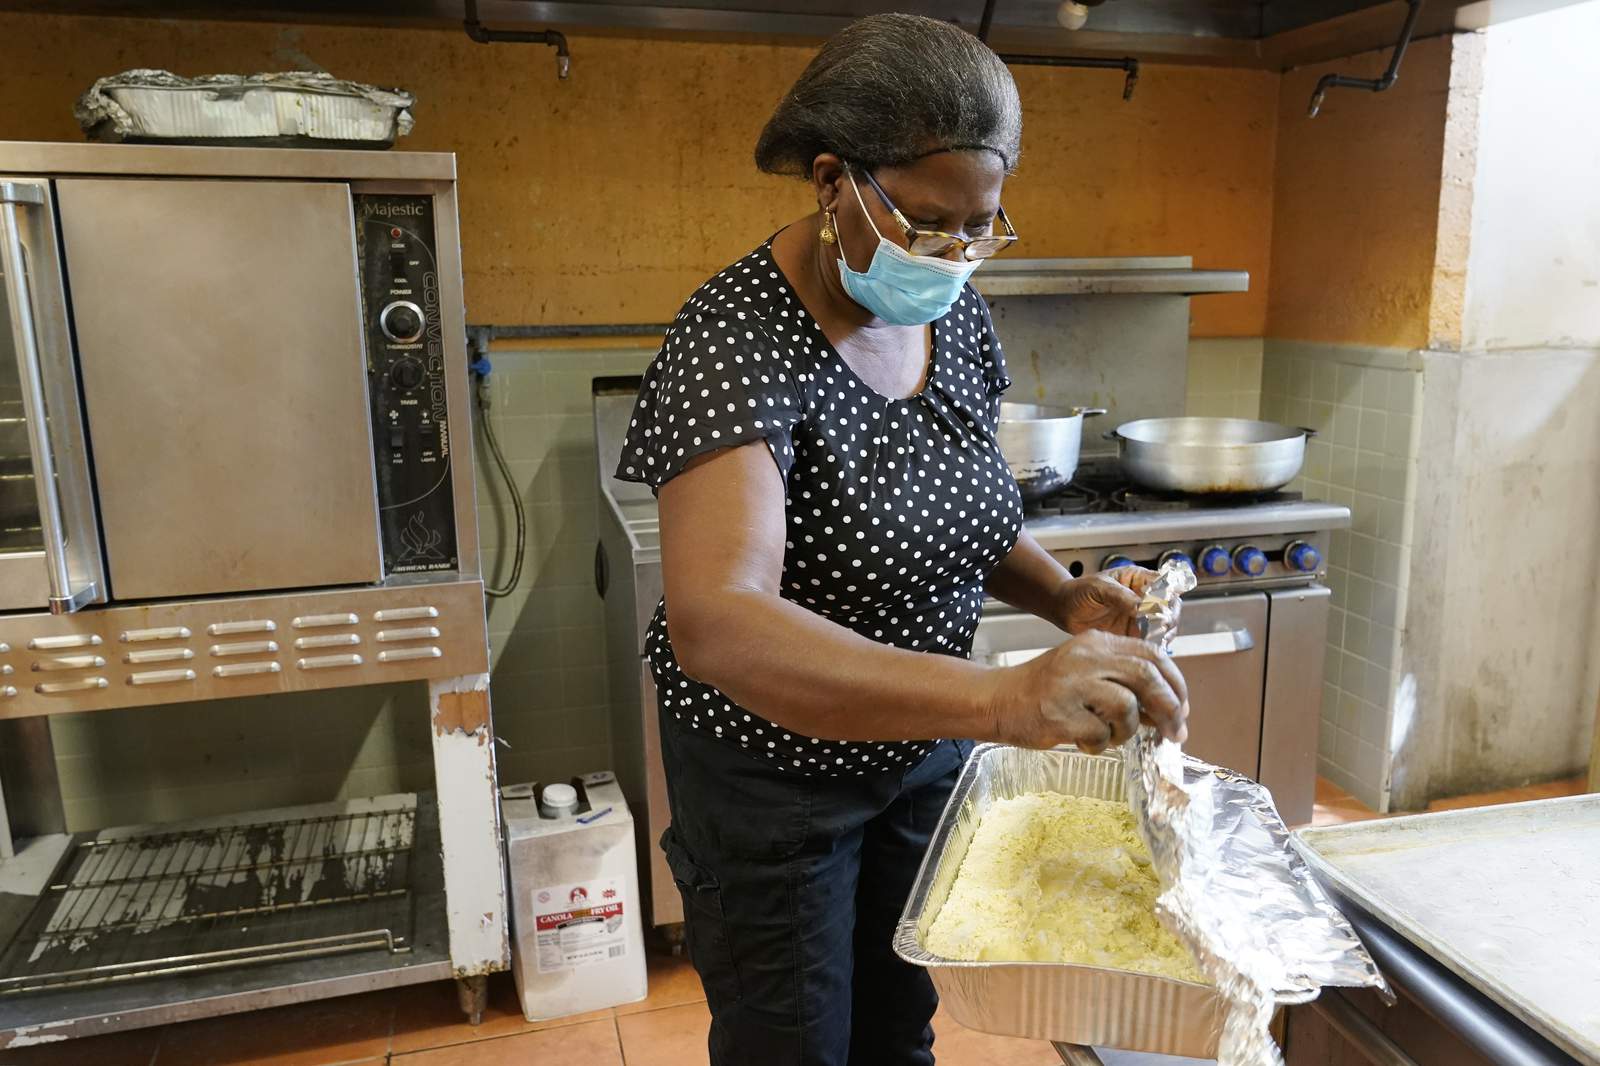 Miami janitor quietly feeds thousands, and love's the reason